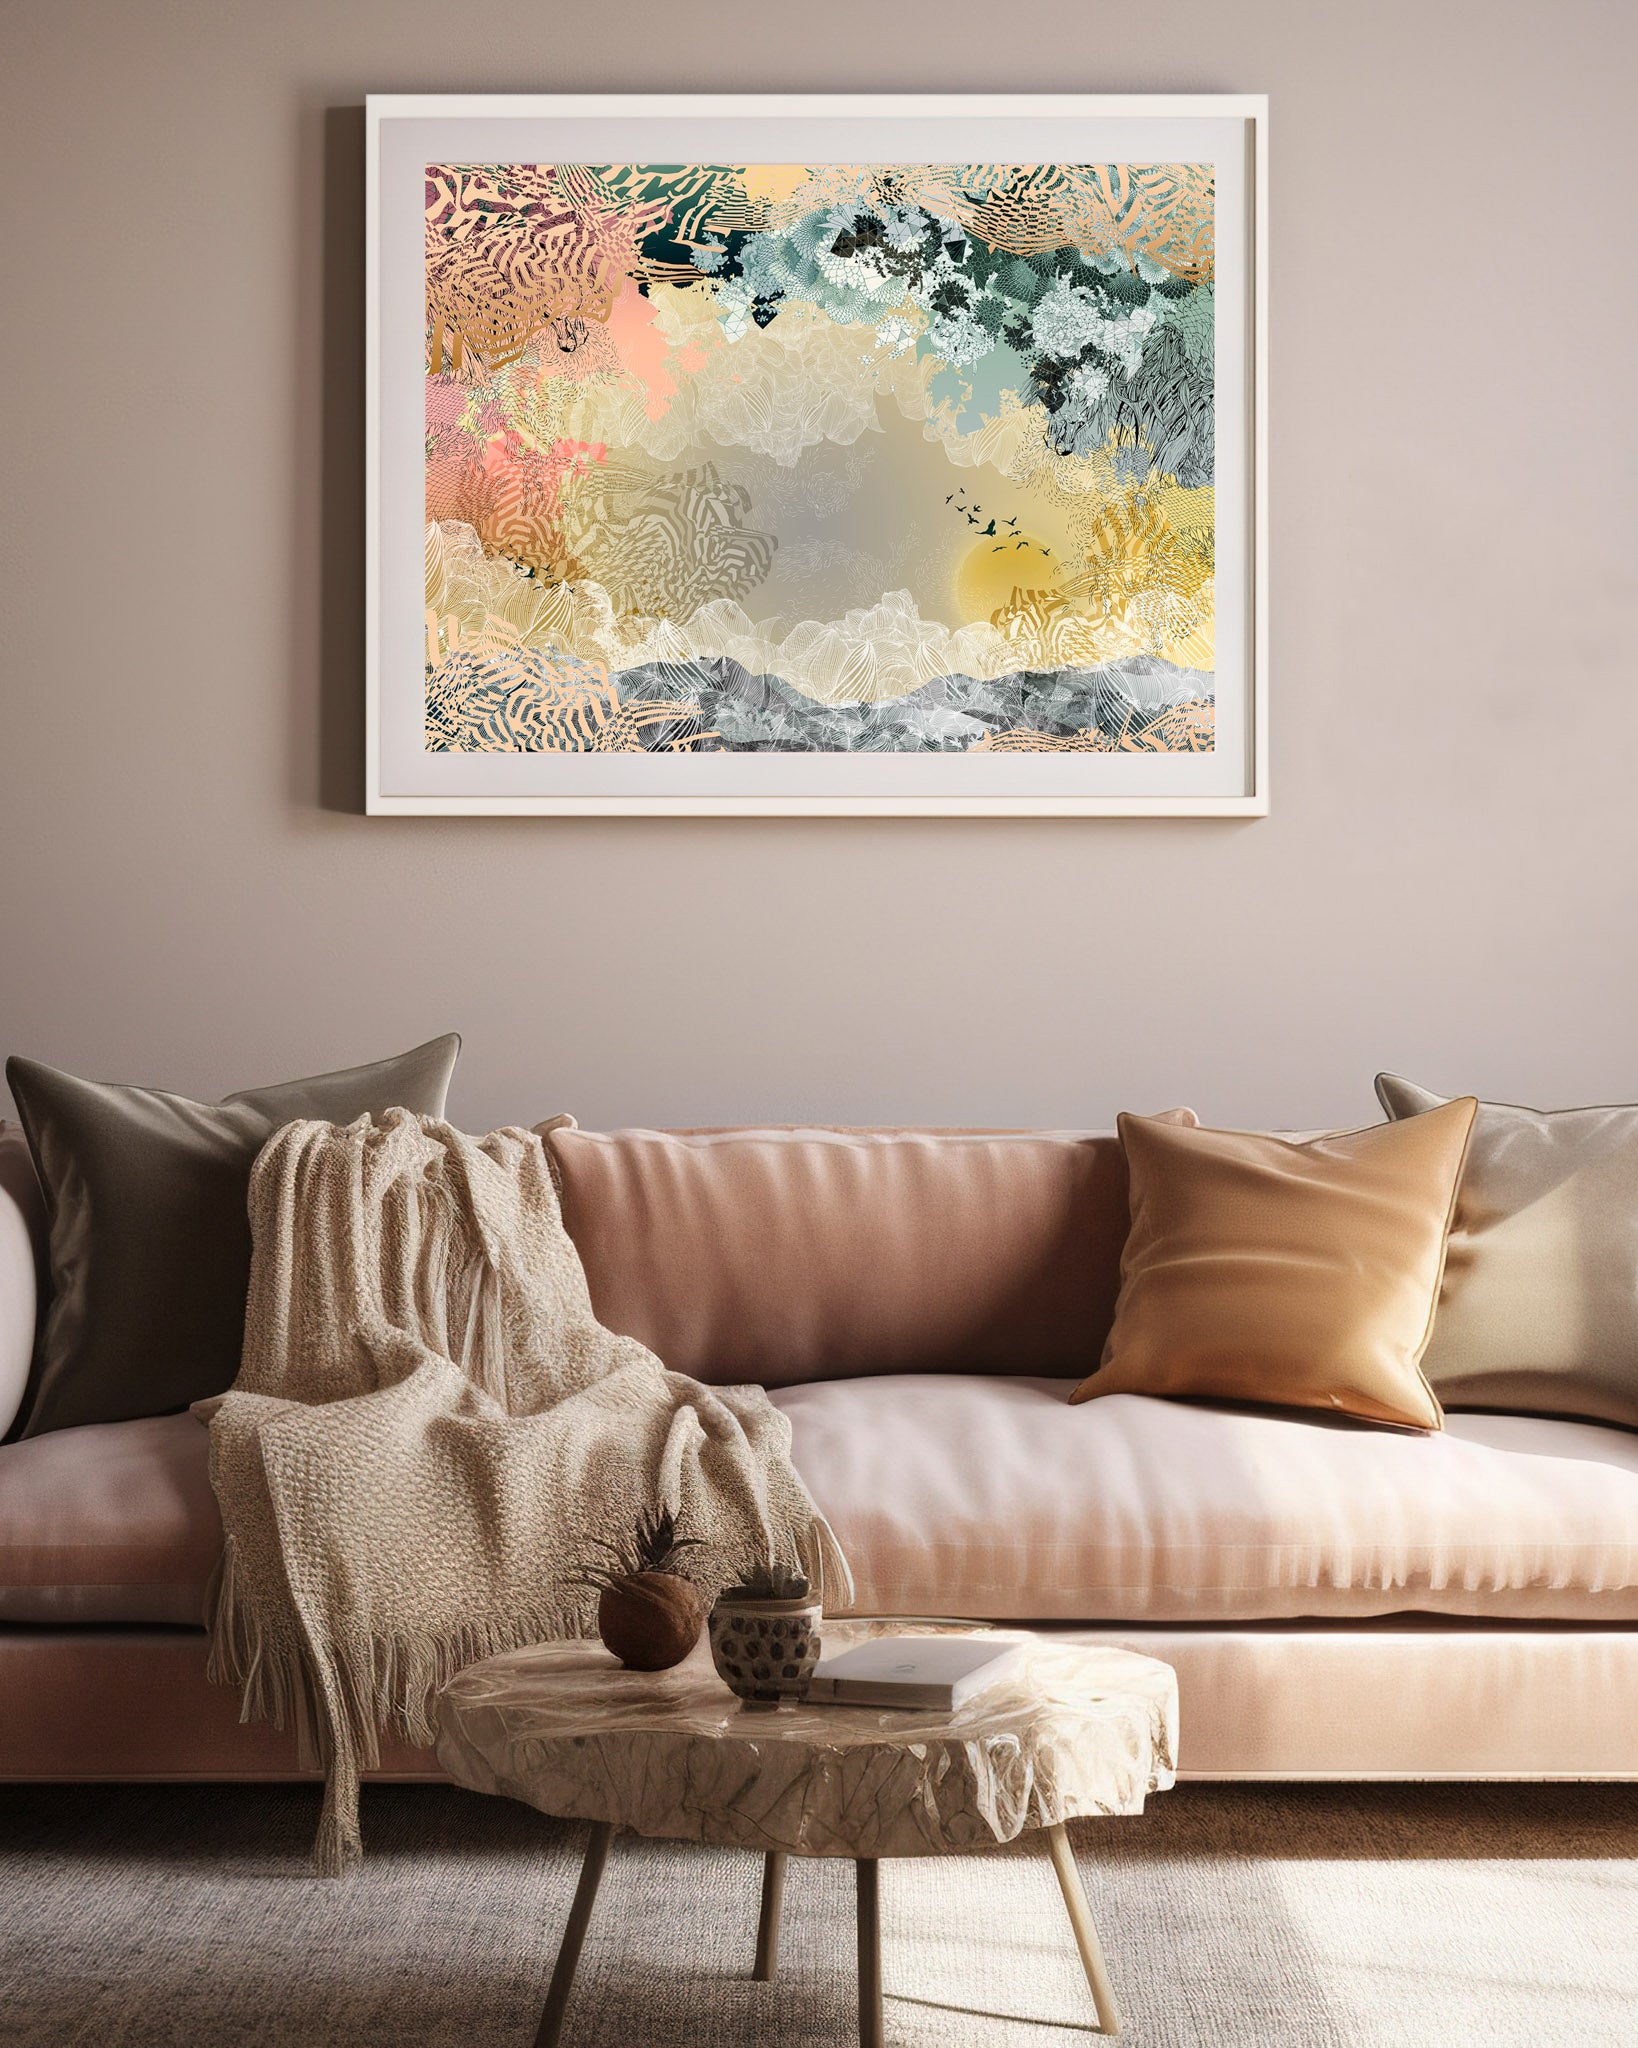 A mock up of a Giclee print in a white frame in front of a pink sofa